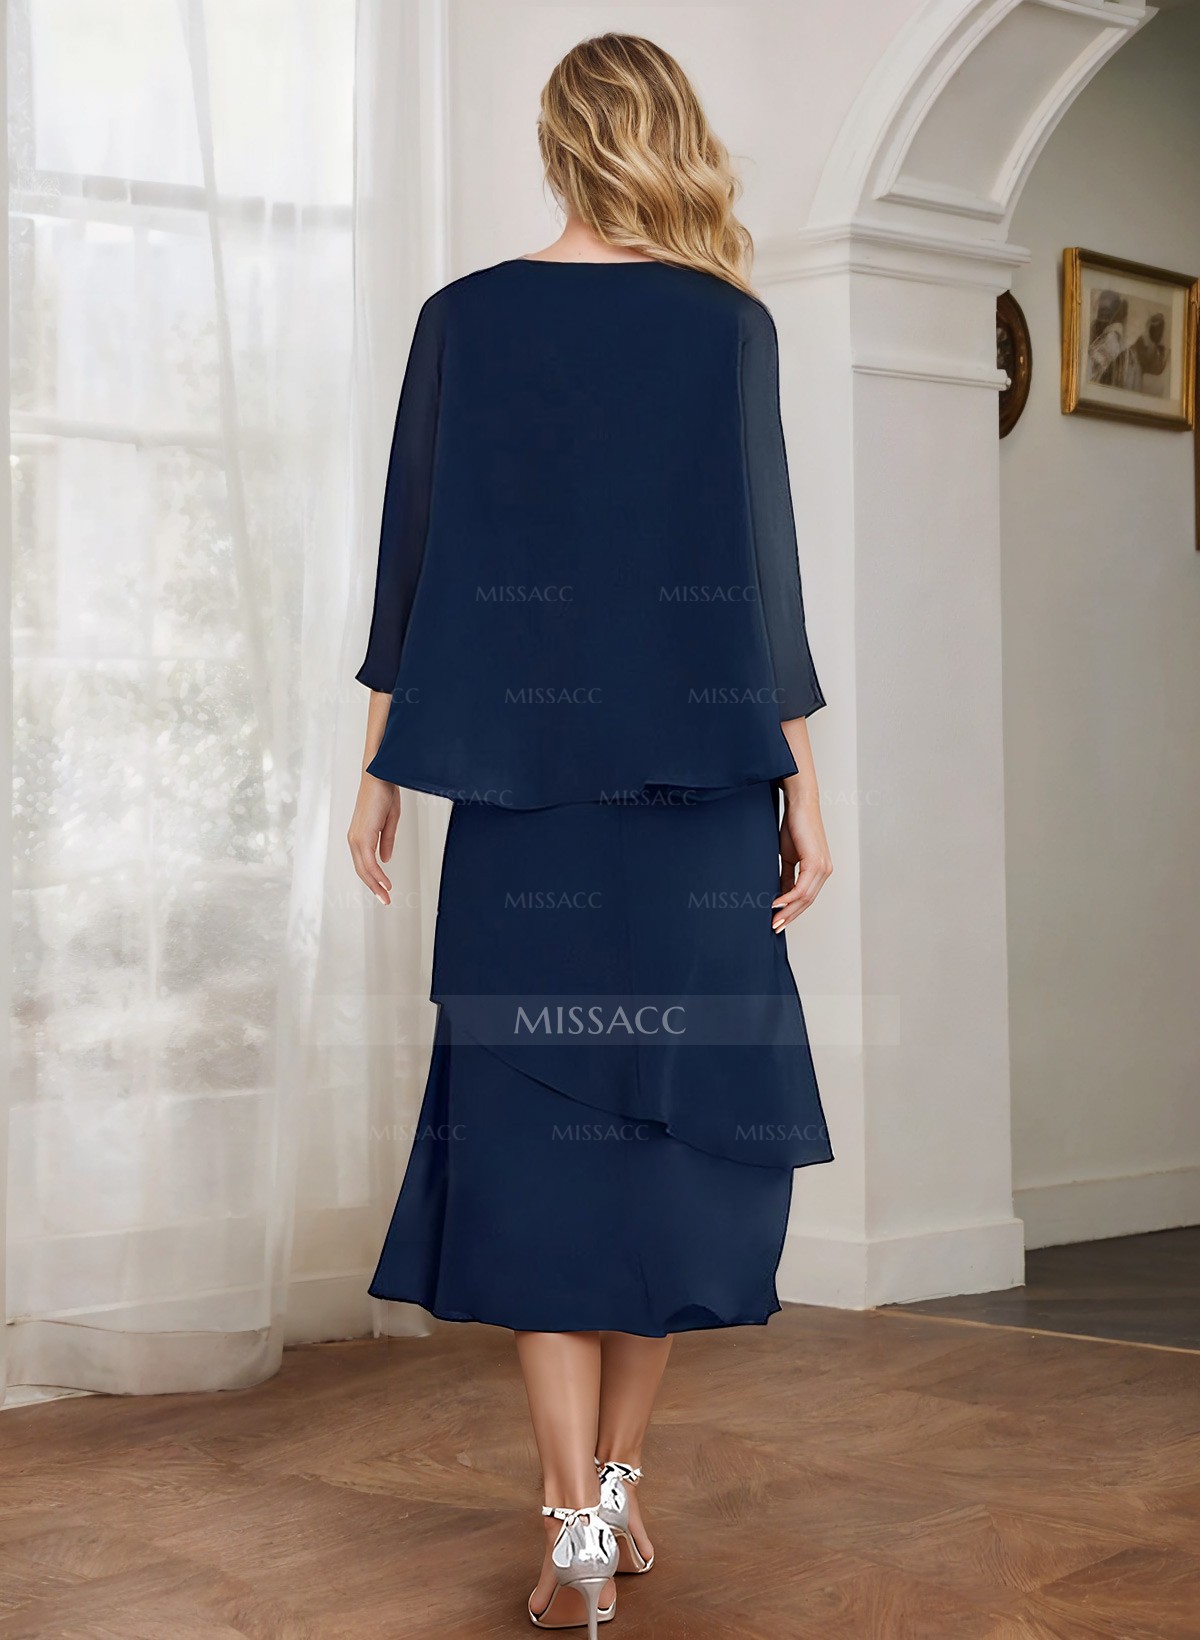 Sheath 3/4 Sleeves Mother Of The Bride Dresses With Chiffon Tea-Length Cascading Ruffles And Jacket